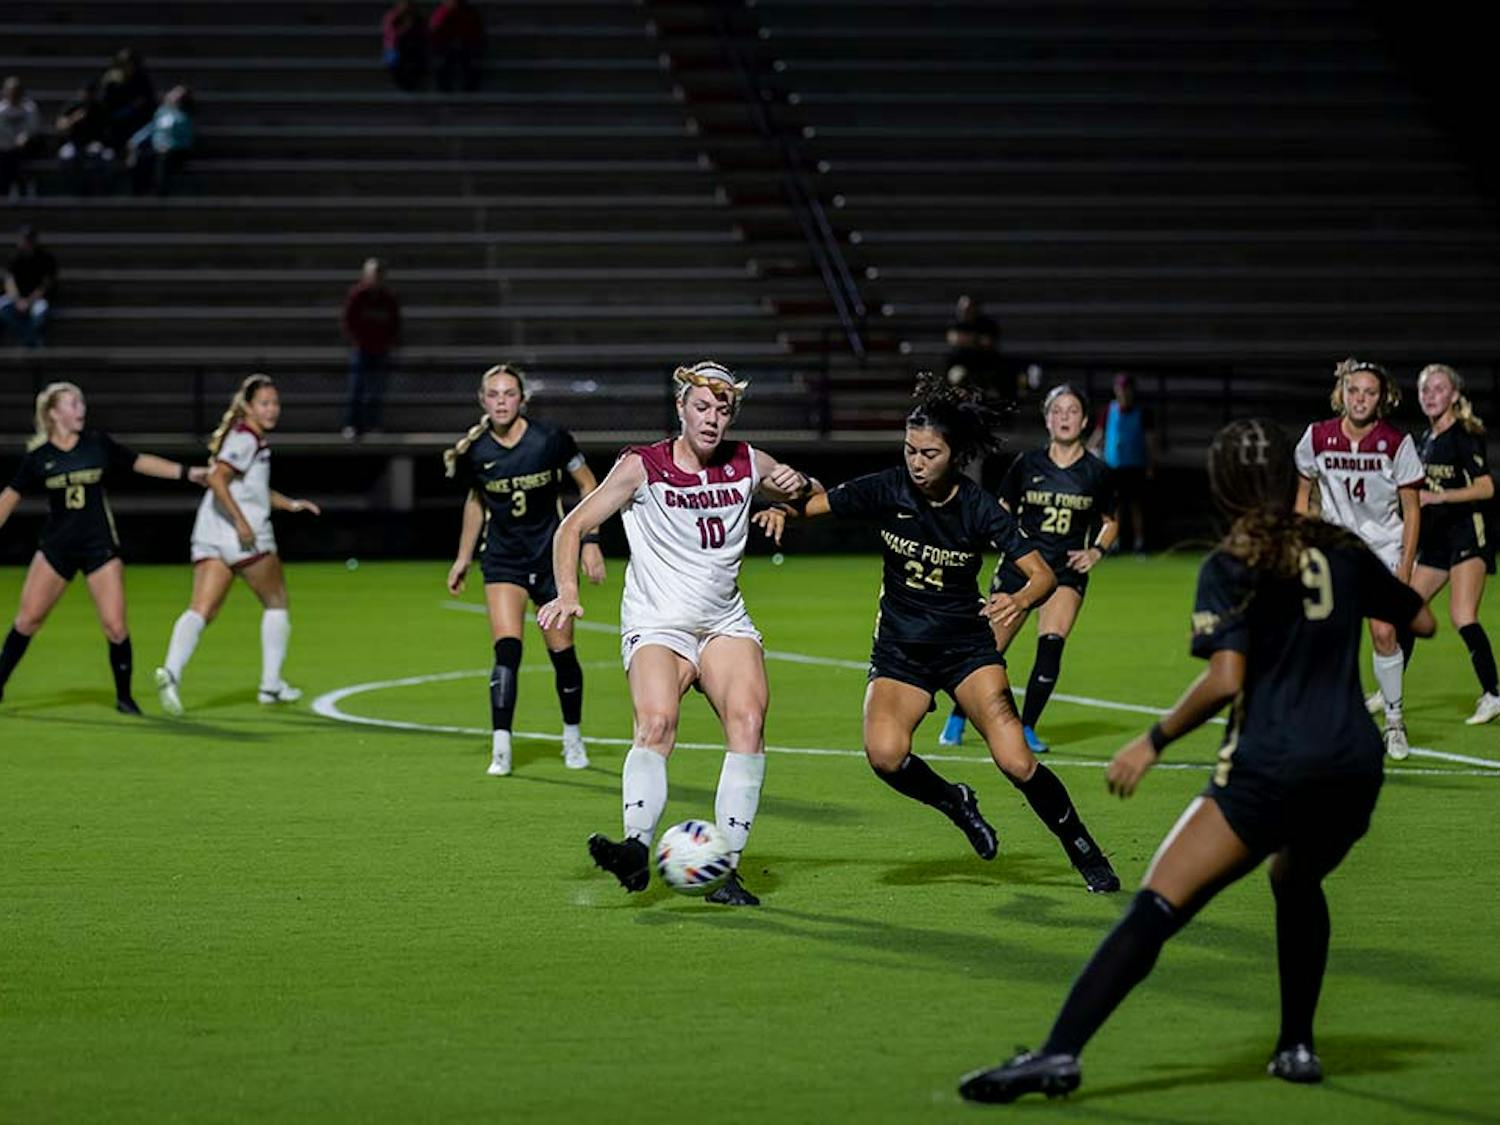 Junior forward Catherine Barry keeps contact with the ball while Wake Forest opponents close in. Barry contributed to the score, making one goal against Wake Forest at Stone Stadium on Nov. 12, 2022.